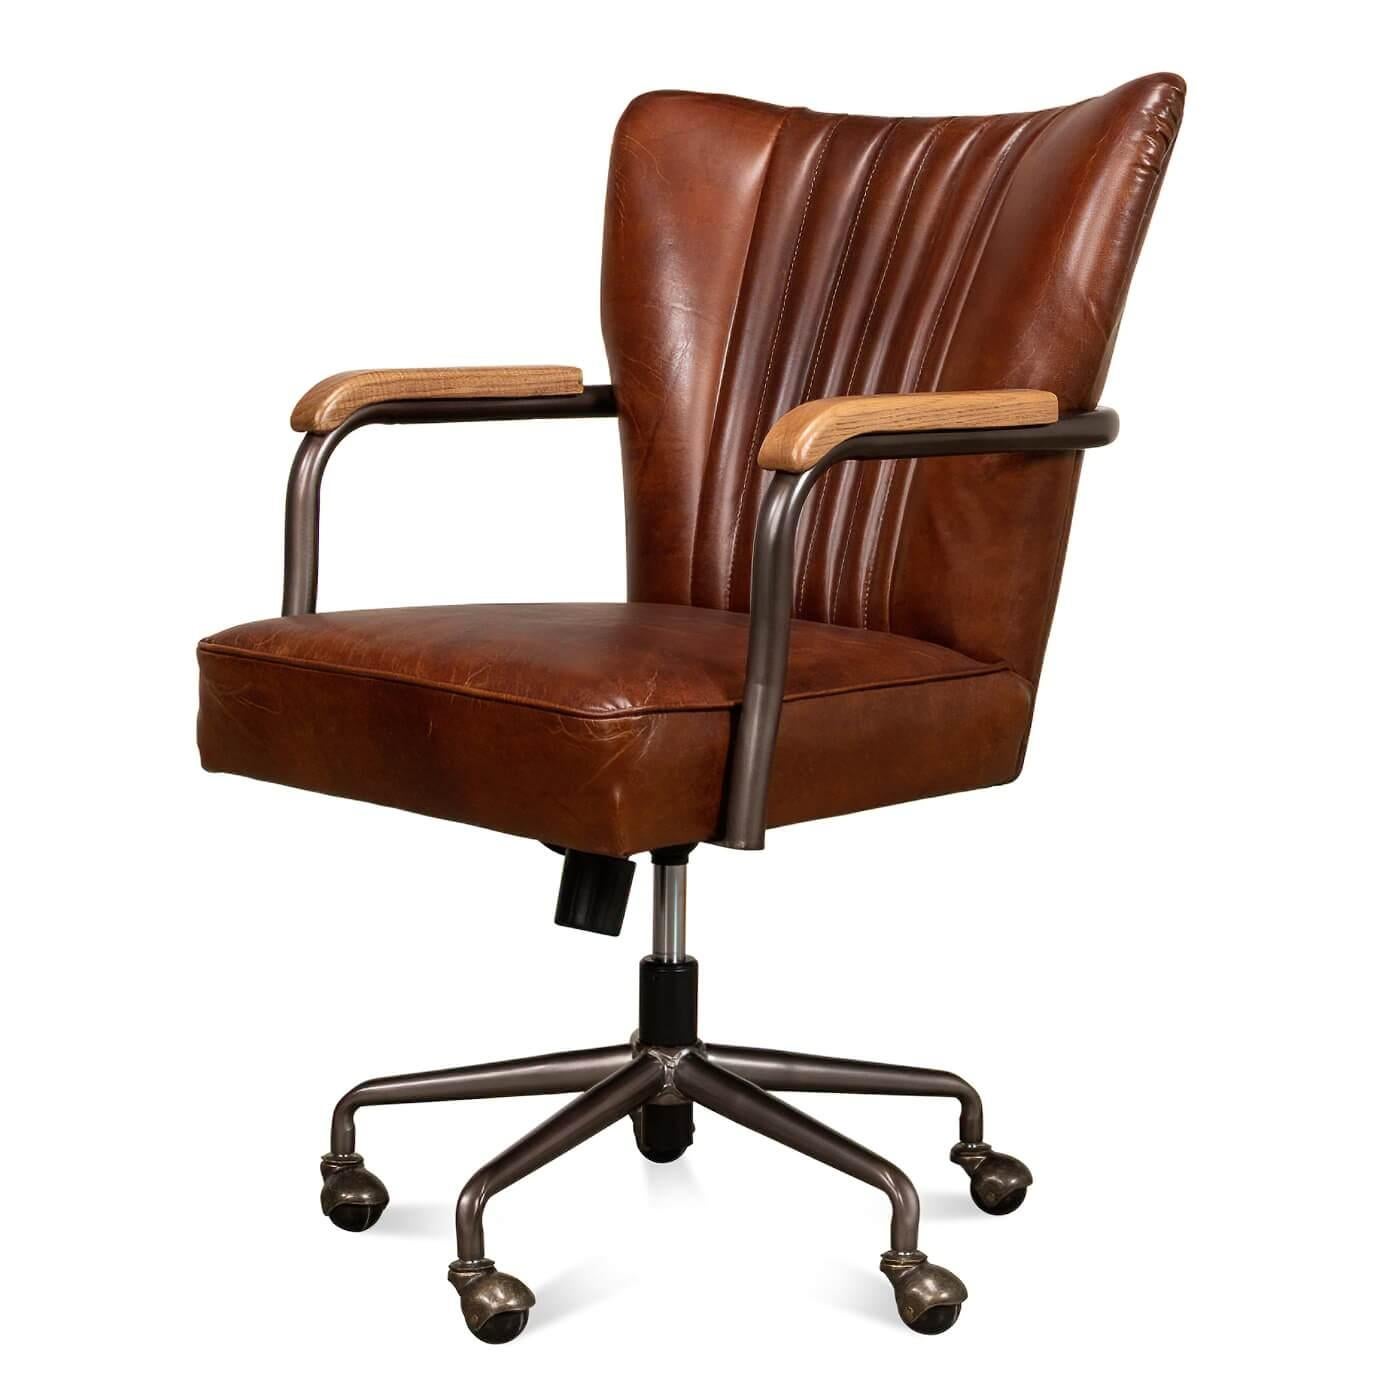 An industrial-style leather desk chair with a 5 ball caster swivel base. This chair is upholstered in our Havana brown leather and has a channel-tufted back detail with open-style metal arms trimmed with wood. 

Dimensions
25